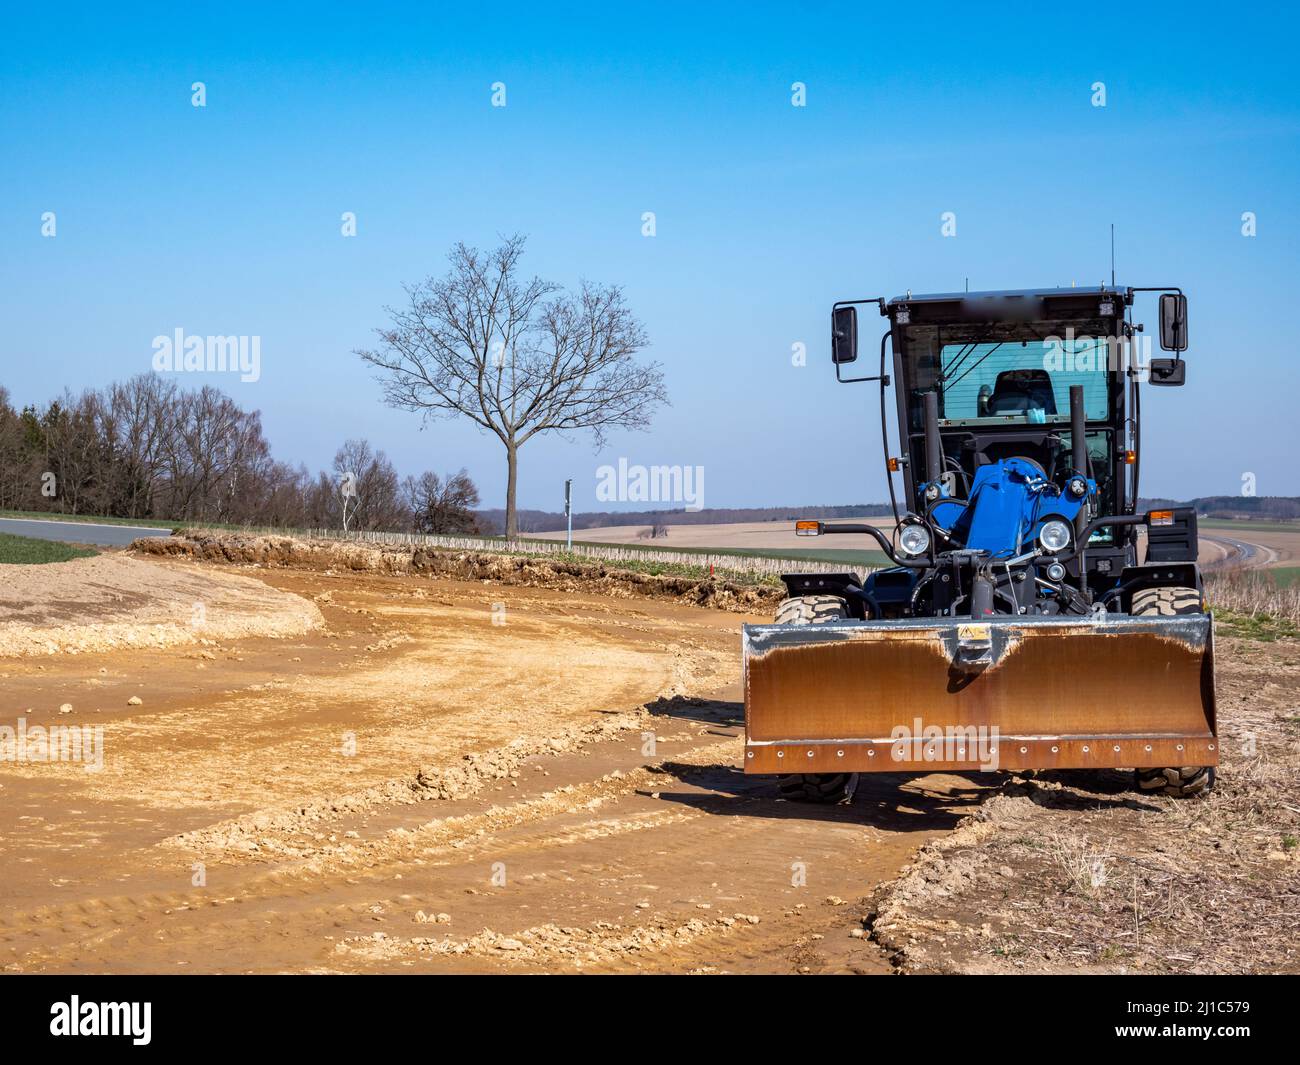 Construction machine for a new road construction Stock Photo